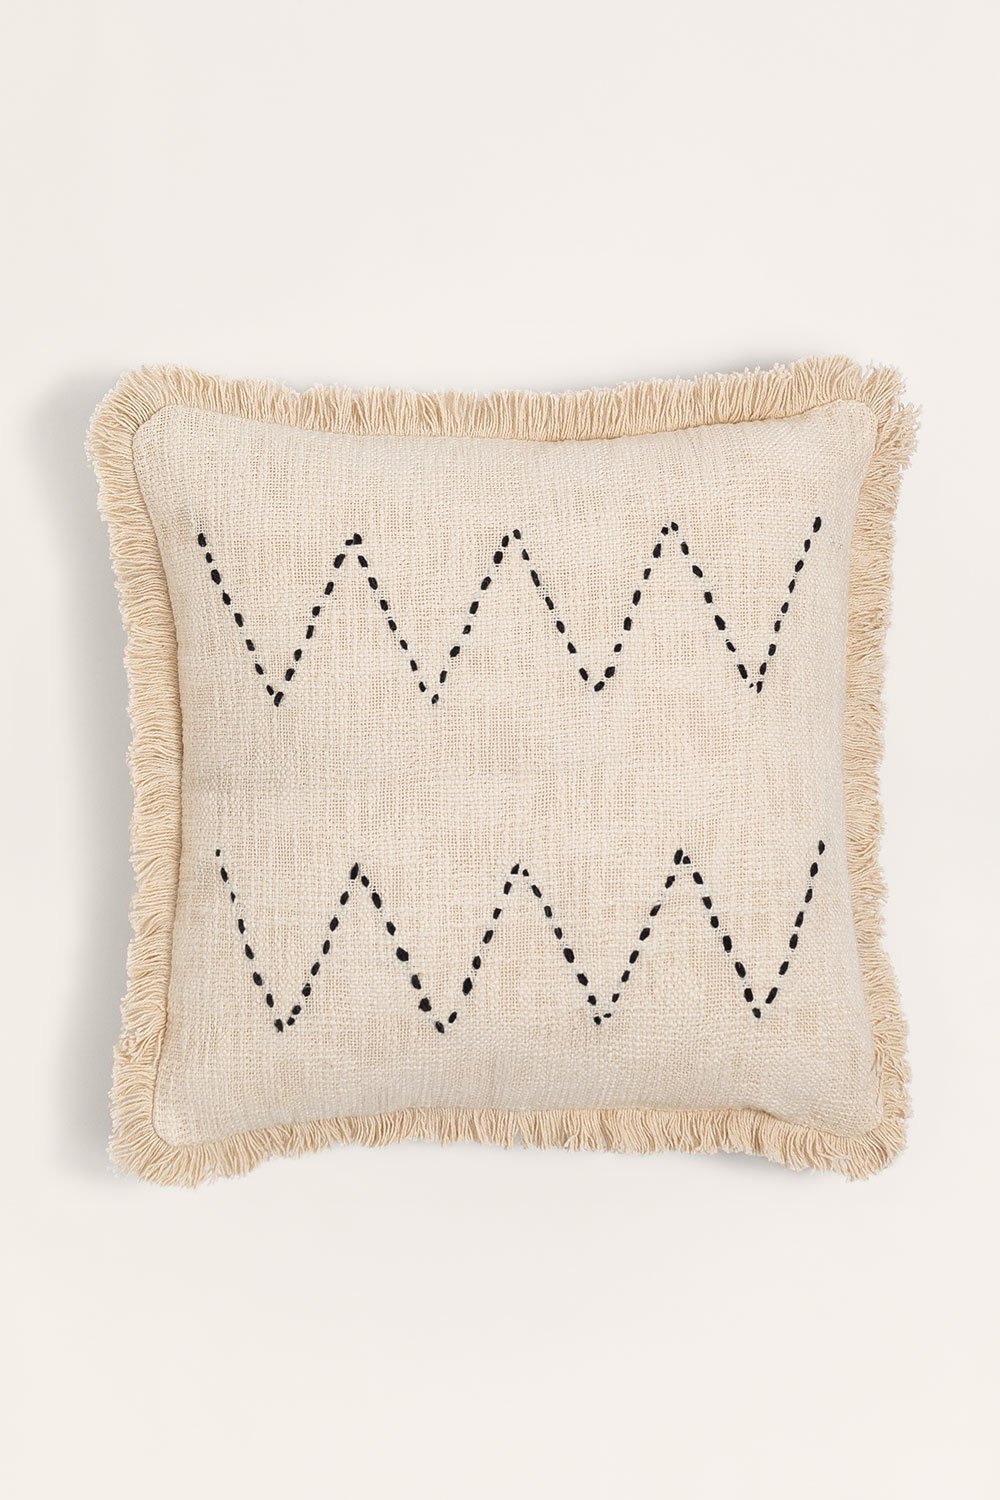  Square Cotton Cushion (45x45 cm) Tapevi, gallery image 1